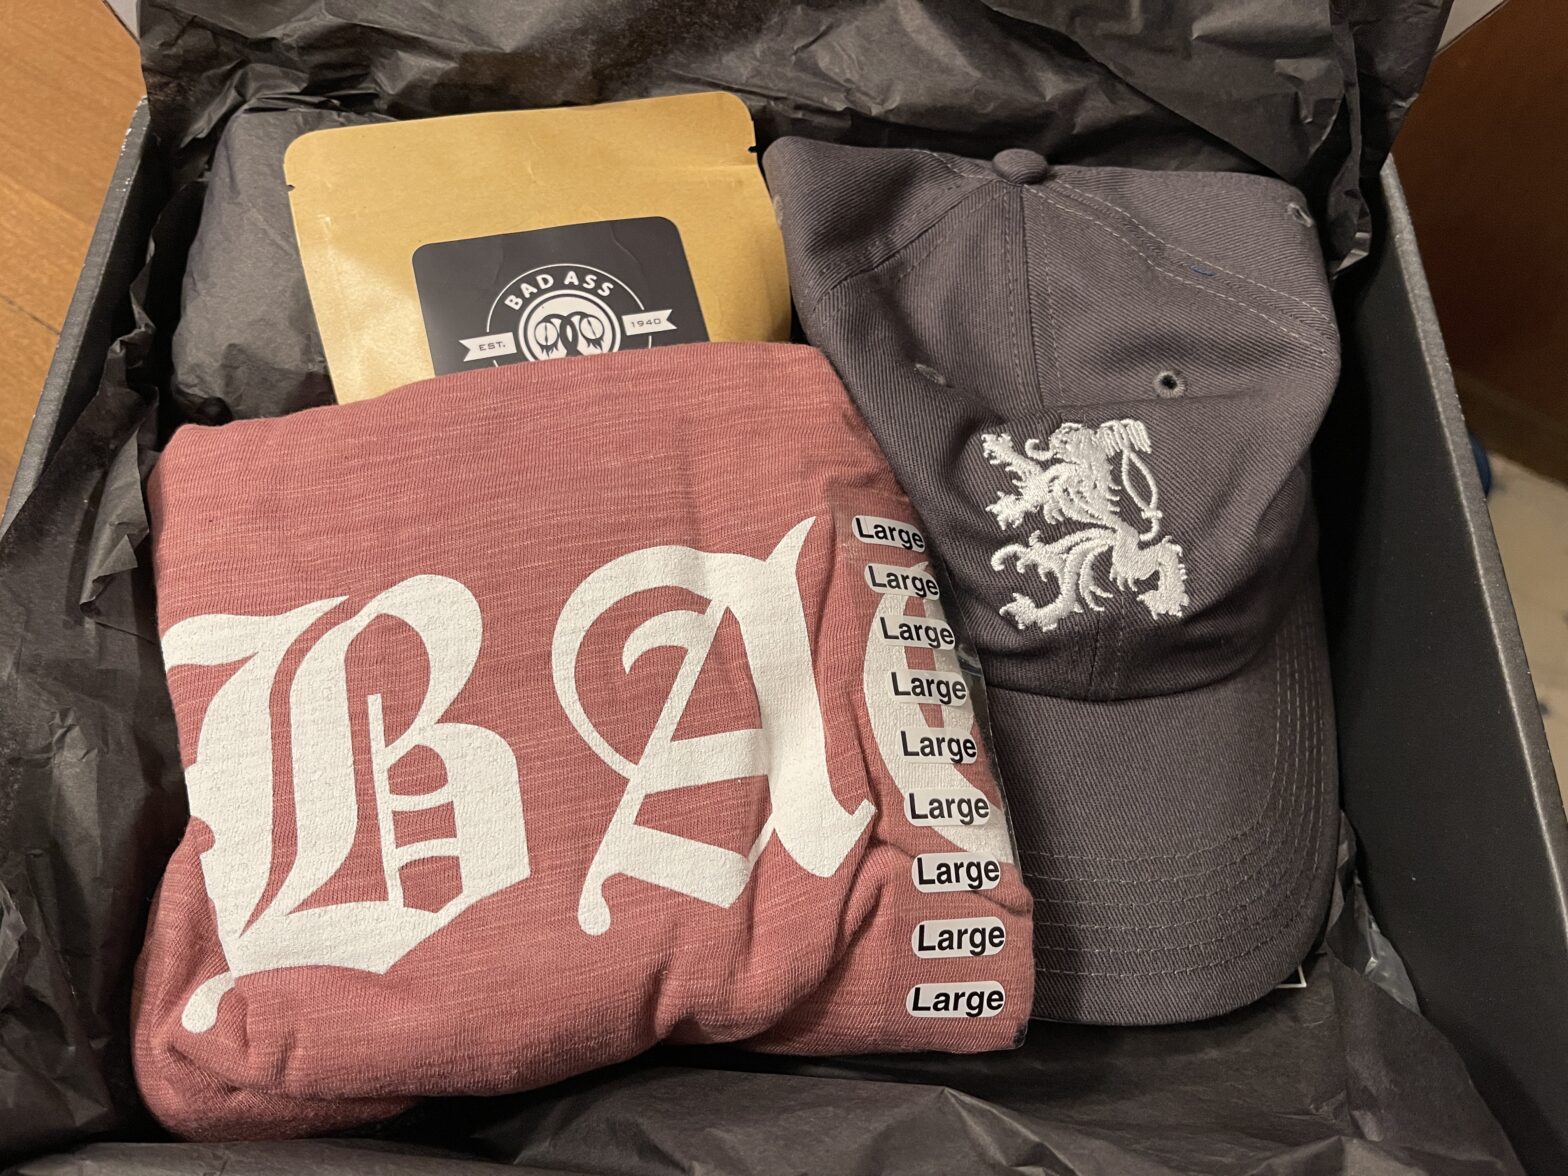 June 2021 Boston Crusaders Mystery Box - Contents